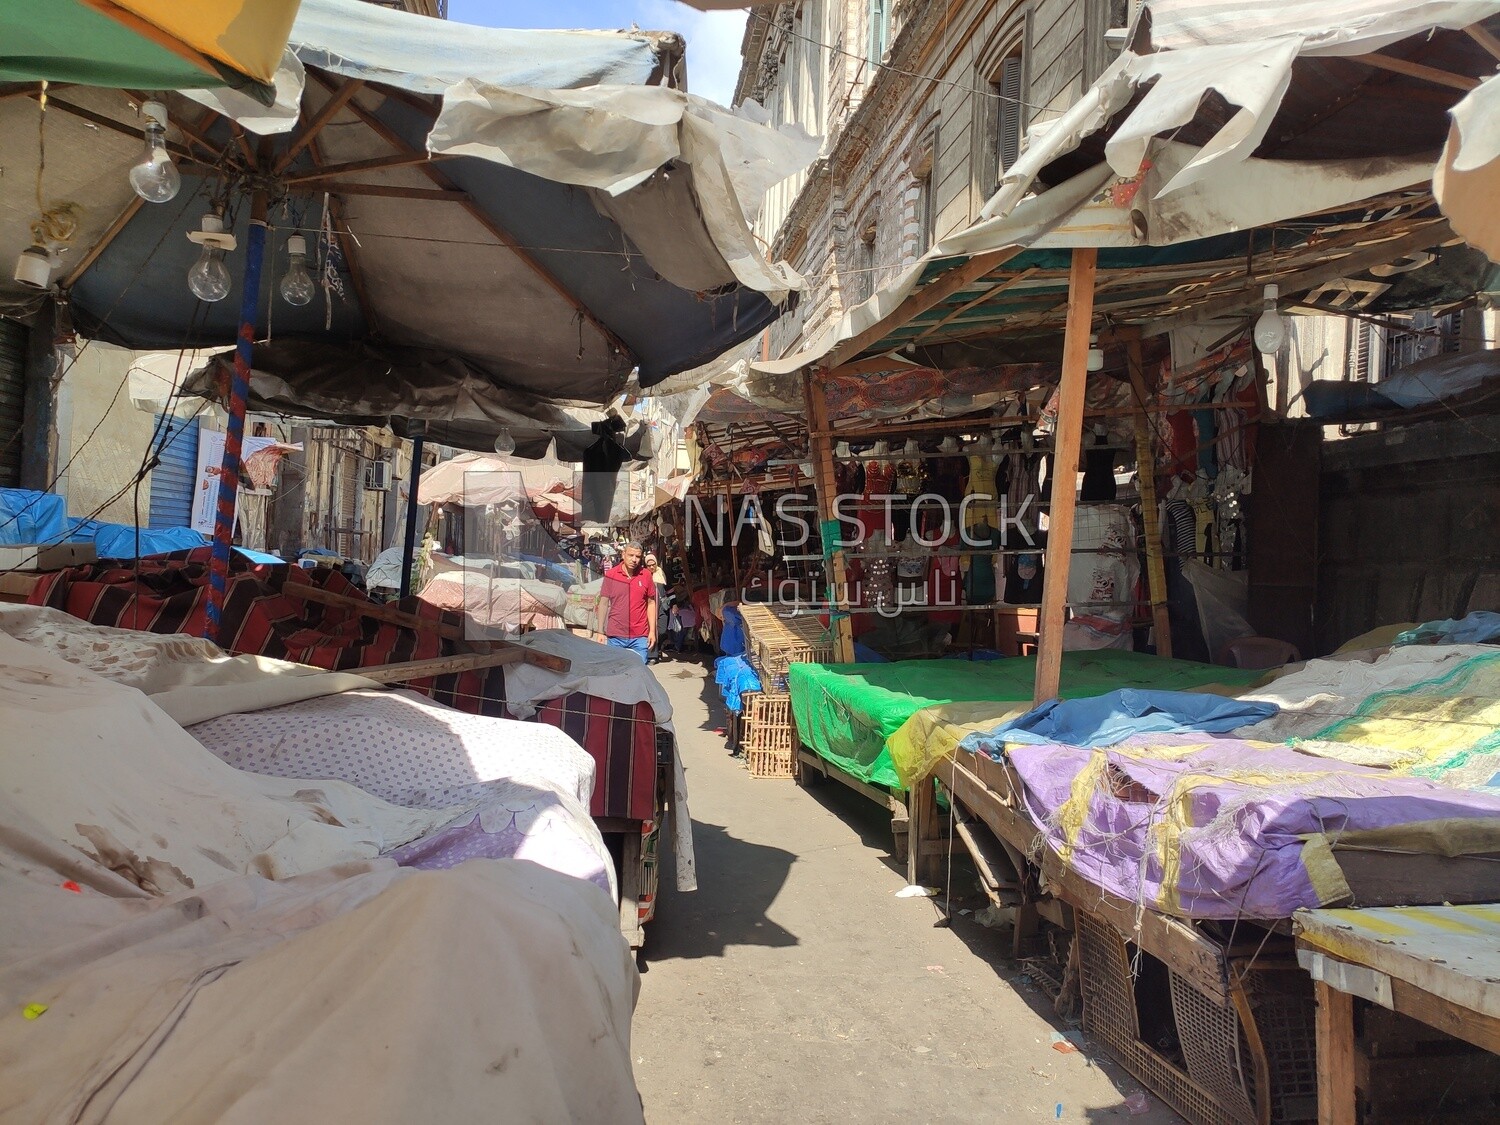 One of the streets in the Mansheya area is full of street vendors&#39; carts early in the morning